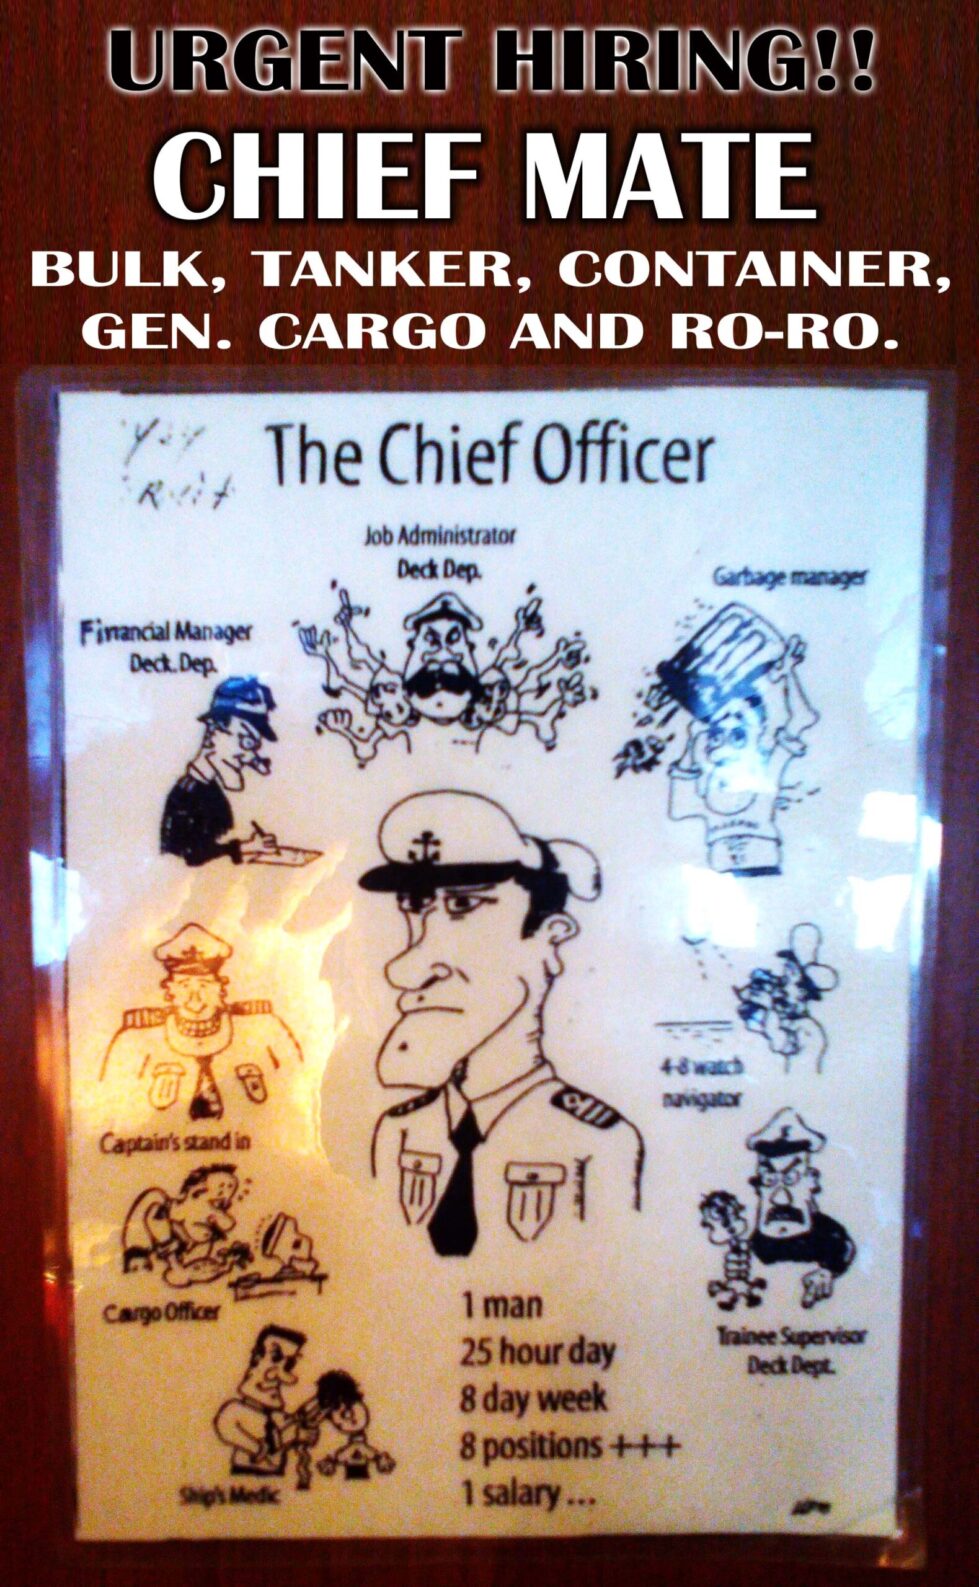 A caricature posted on board about the jobs of a Chief Officer.